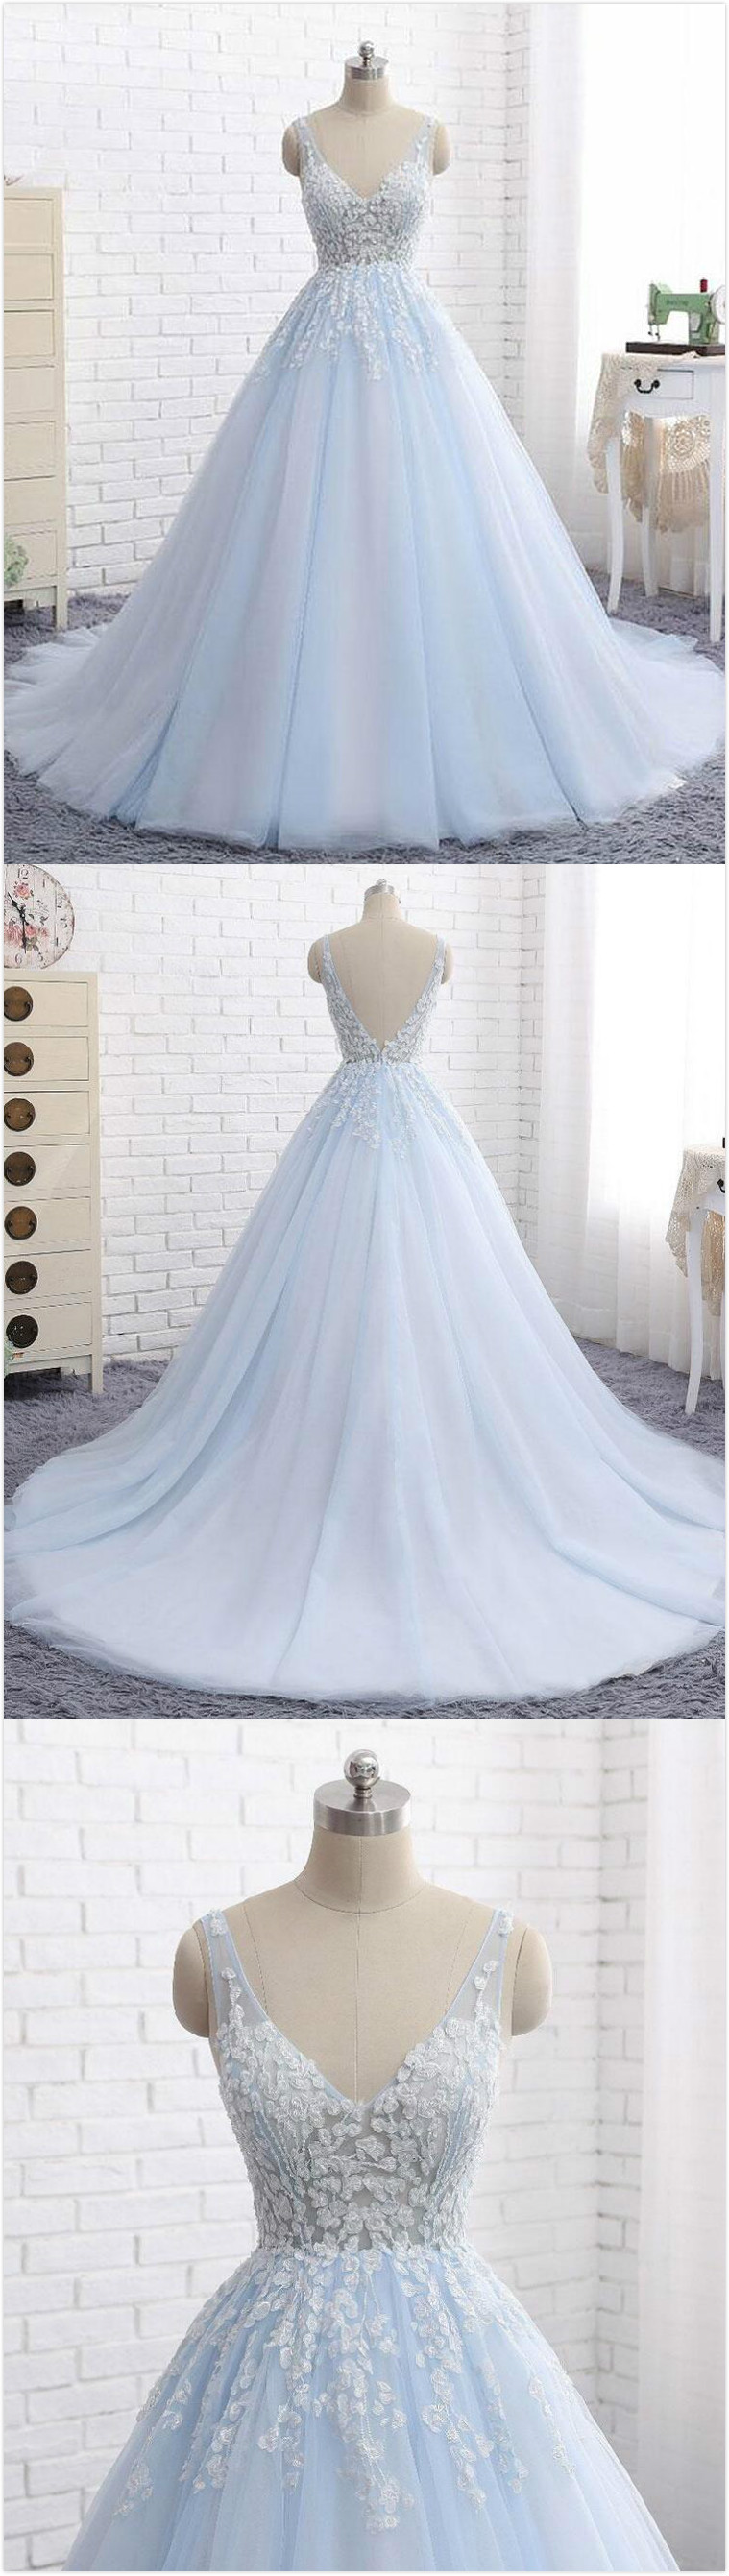 Elegant Ball Gown Prom Dress,v-neck Prom Dress,sexy Prom Dress,2018 Prom Dress,formal Fress,blue Tulle Long Prom/evening Dress With Appliques